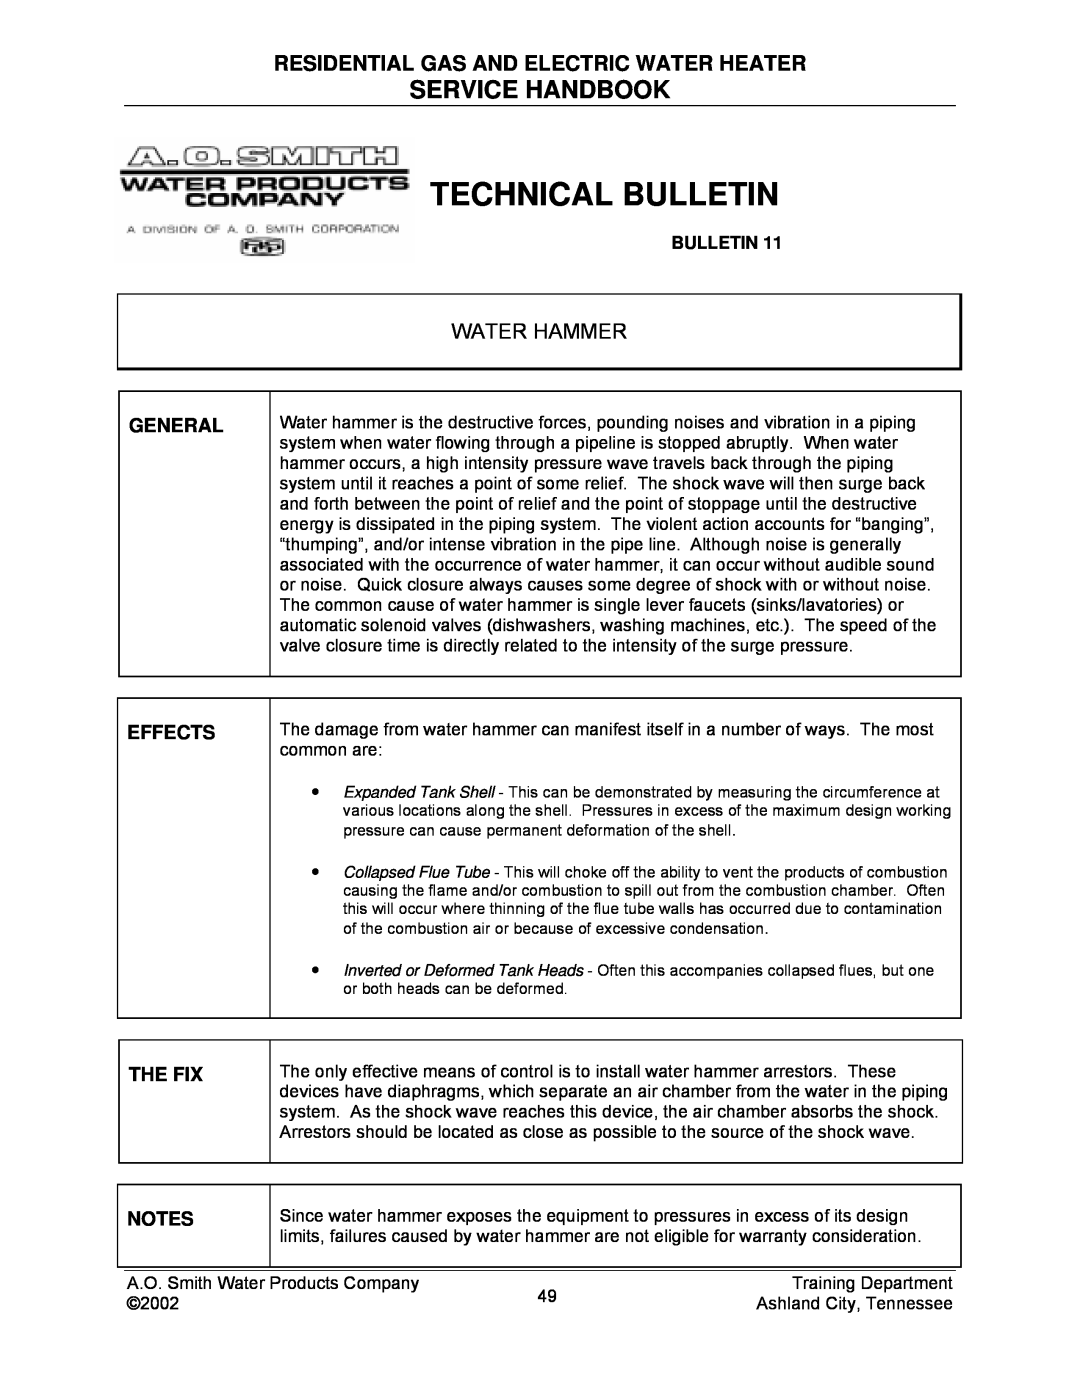 A.O. Smith TC-049-R2 manual Technical Bulletin, Service Handbook, Residential Gas And Electric Water Heater, Water Hammer 